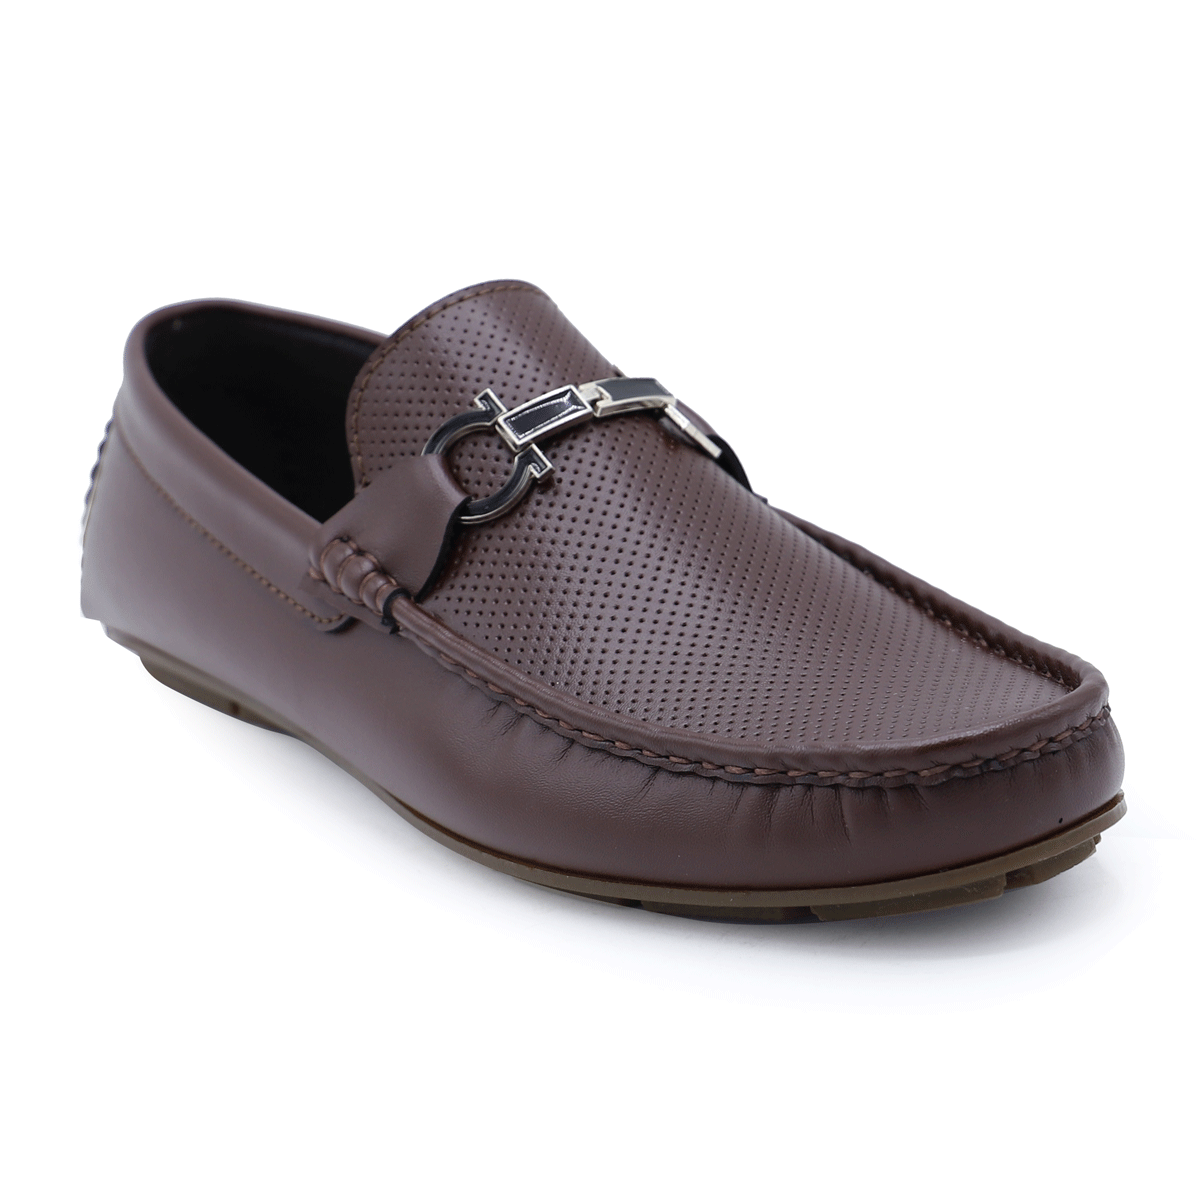 Brown Casual Slip On 165097